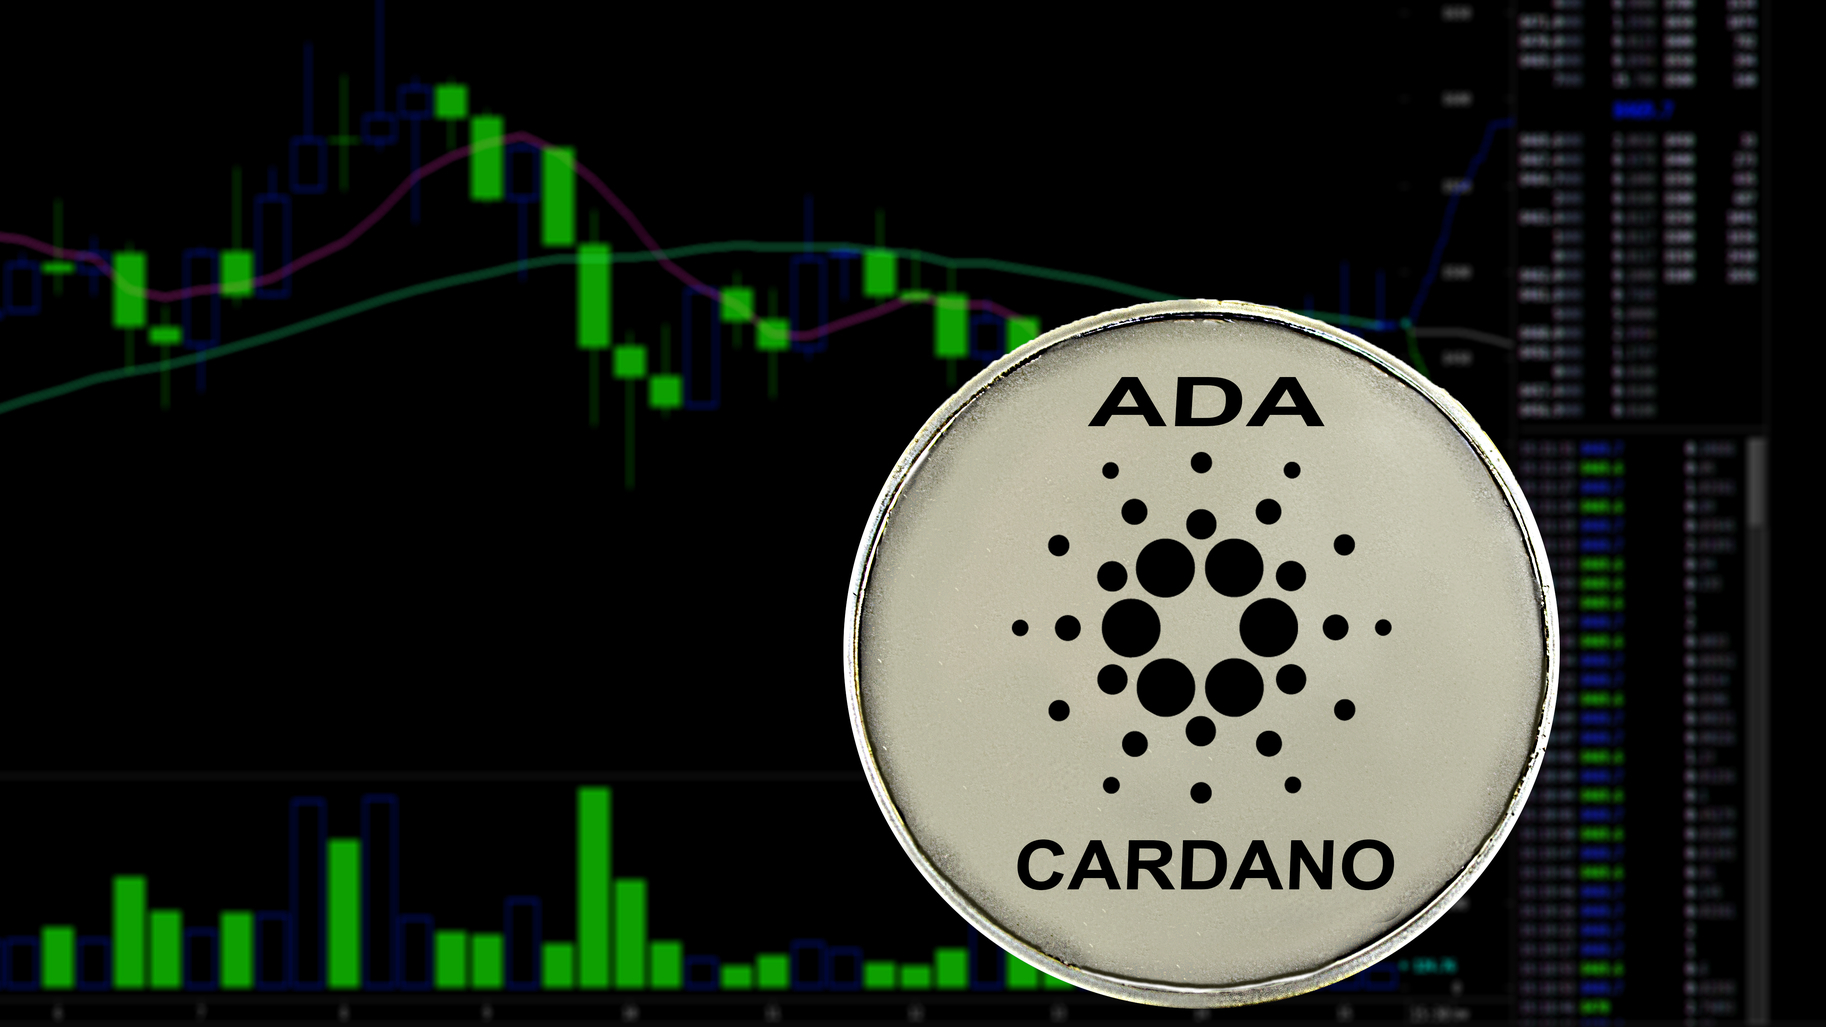 Cardano Drops Out of Top 10 by Market Cap Again as Toncoin Rises